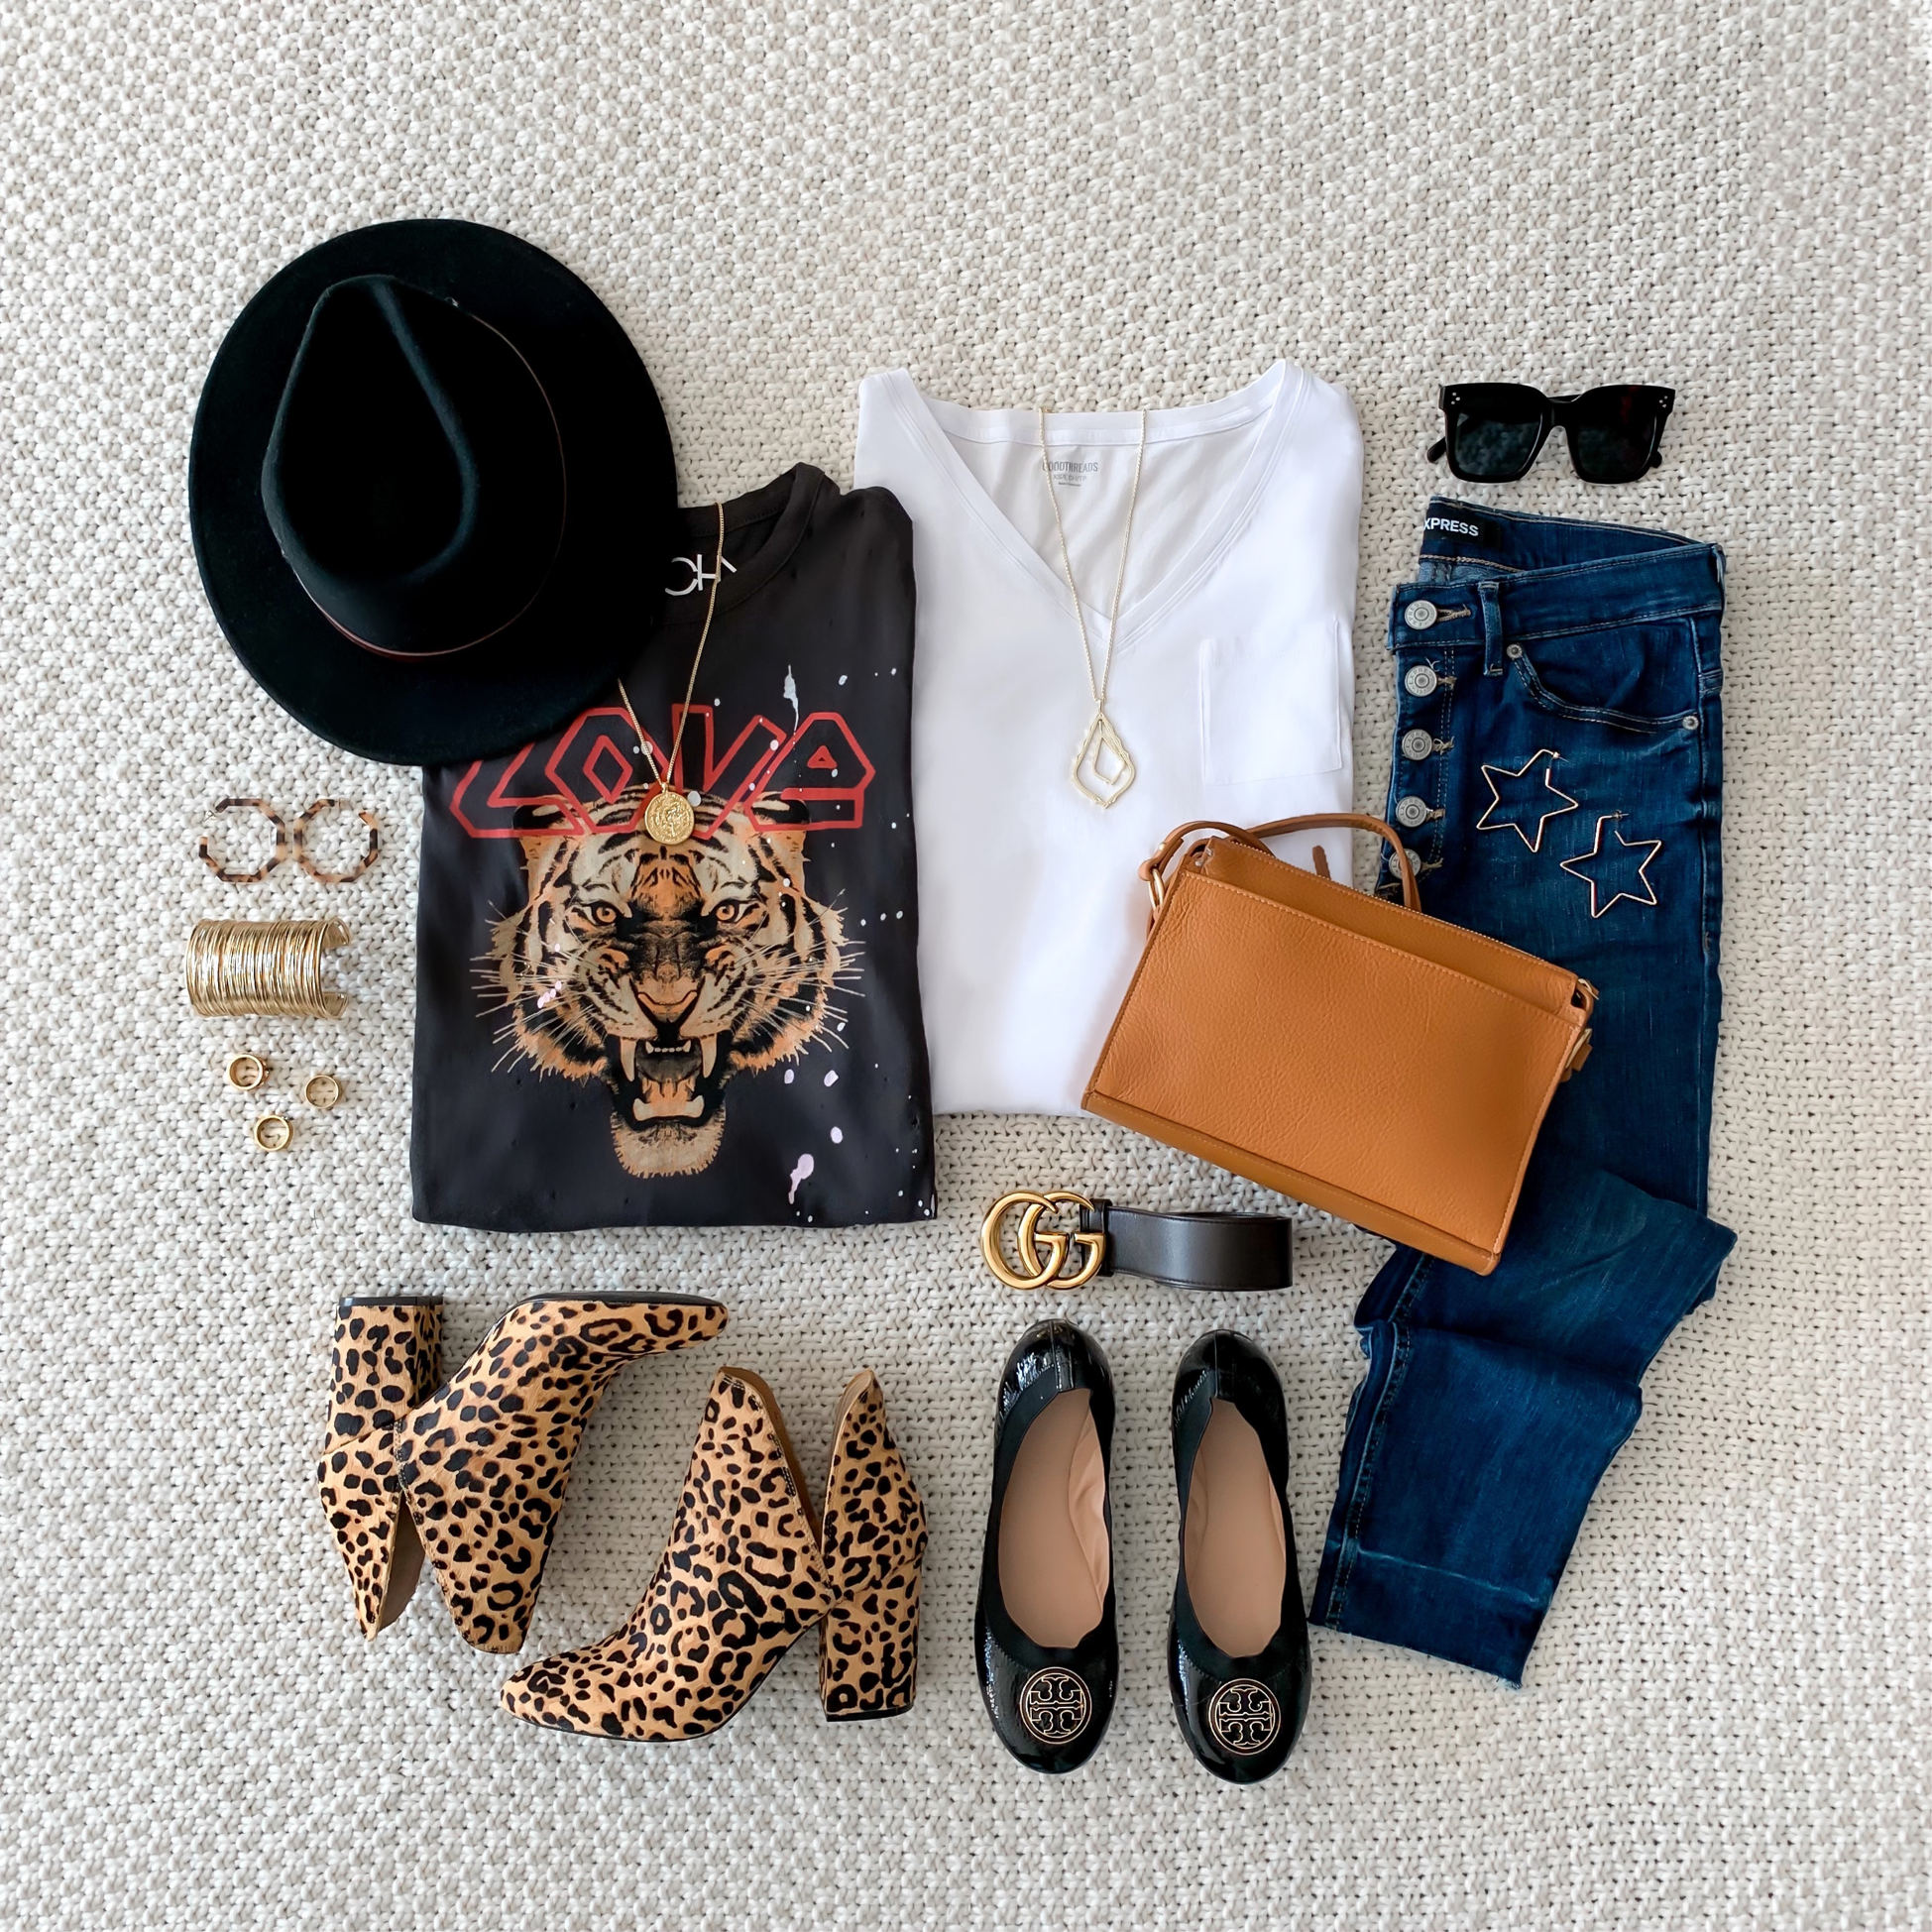 Blogger Sarah Lindner of The House of Sequins styling graphic tees with casual basics.